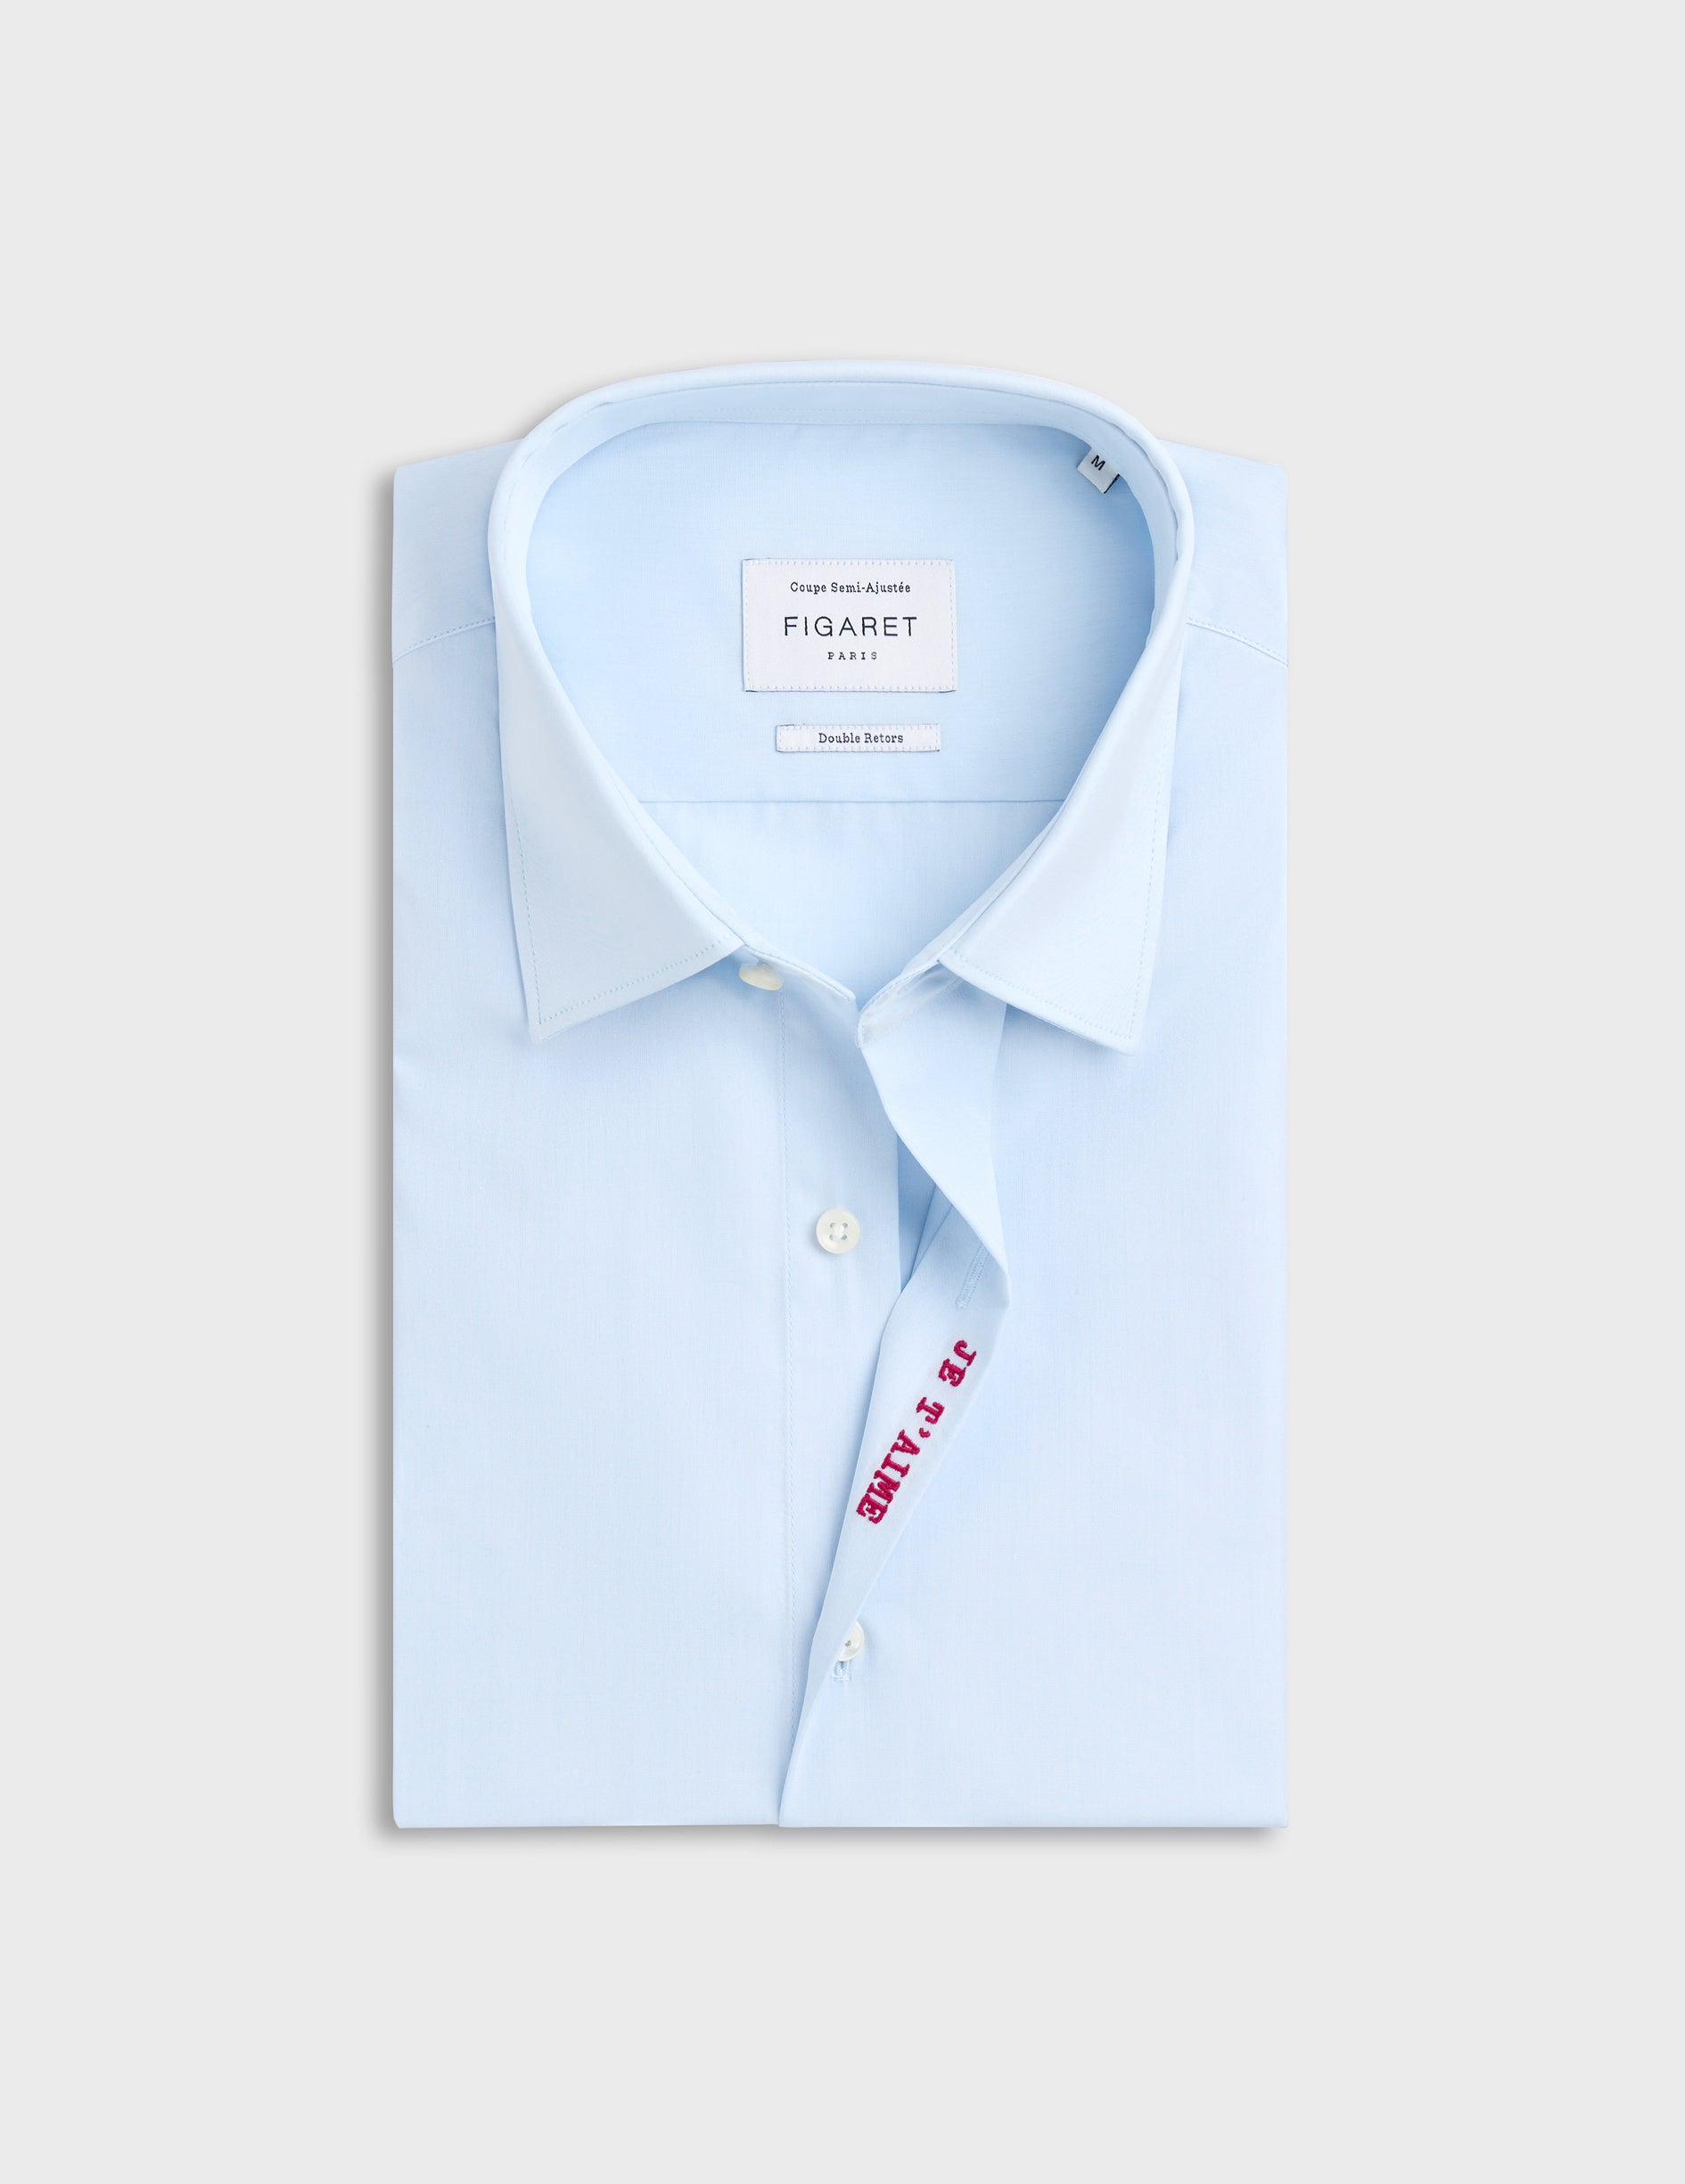 Blue "Je t'aime" shirt with red embroidery - Poplin - Figaret Collar